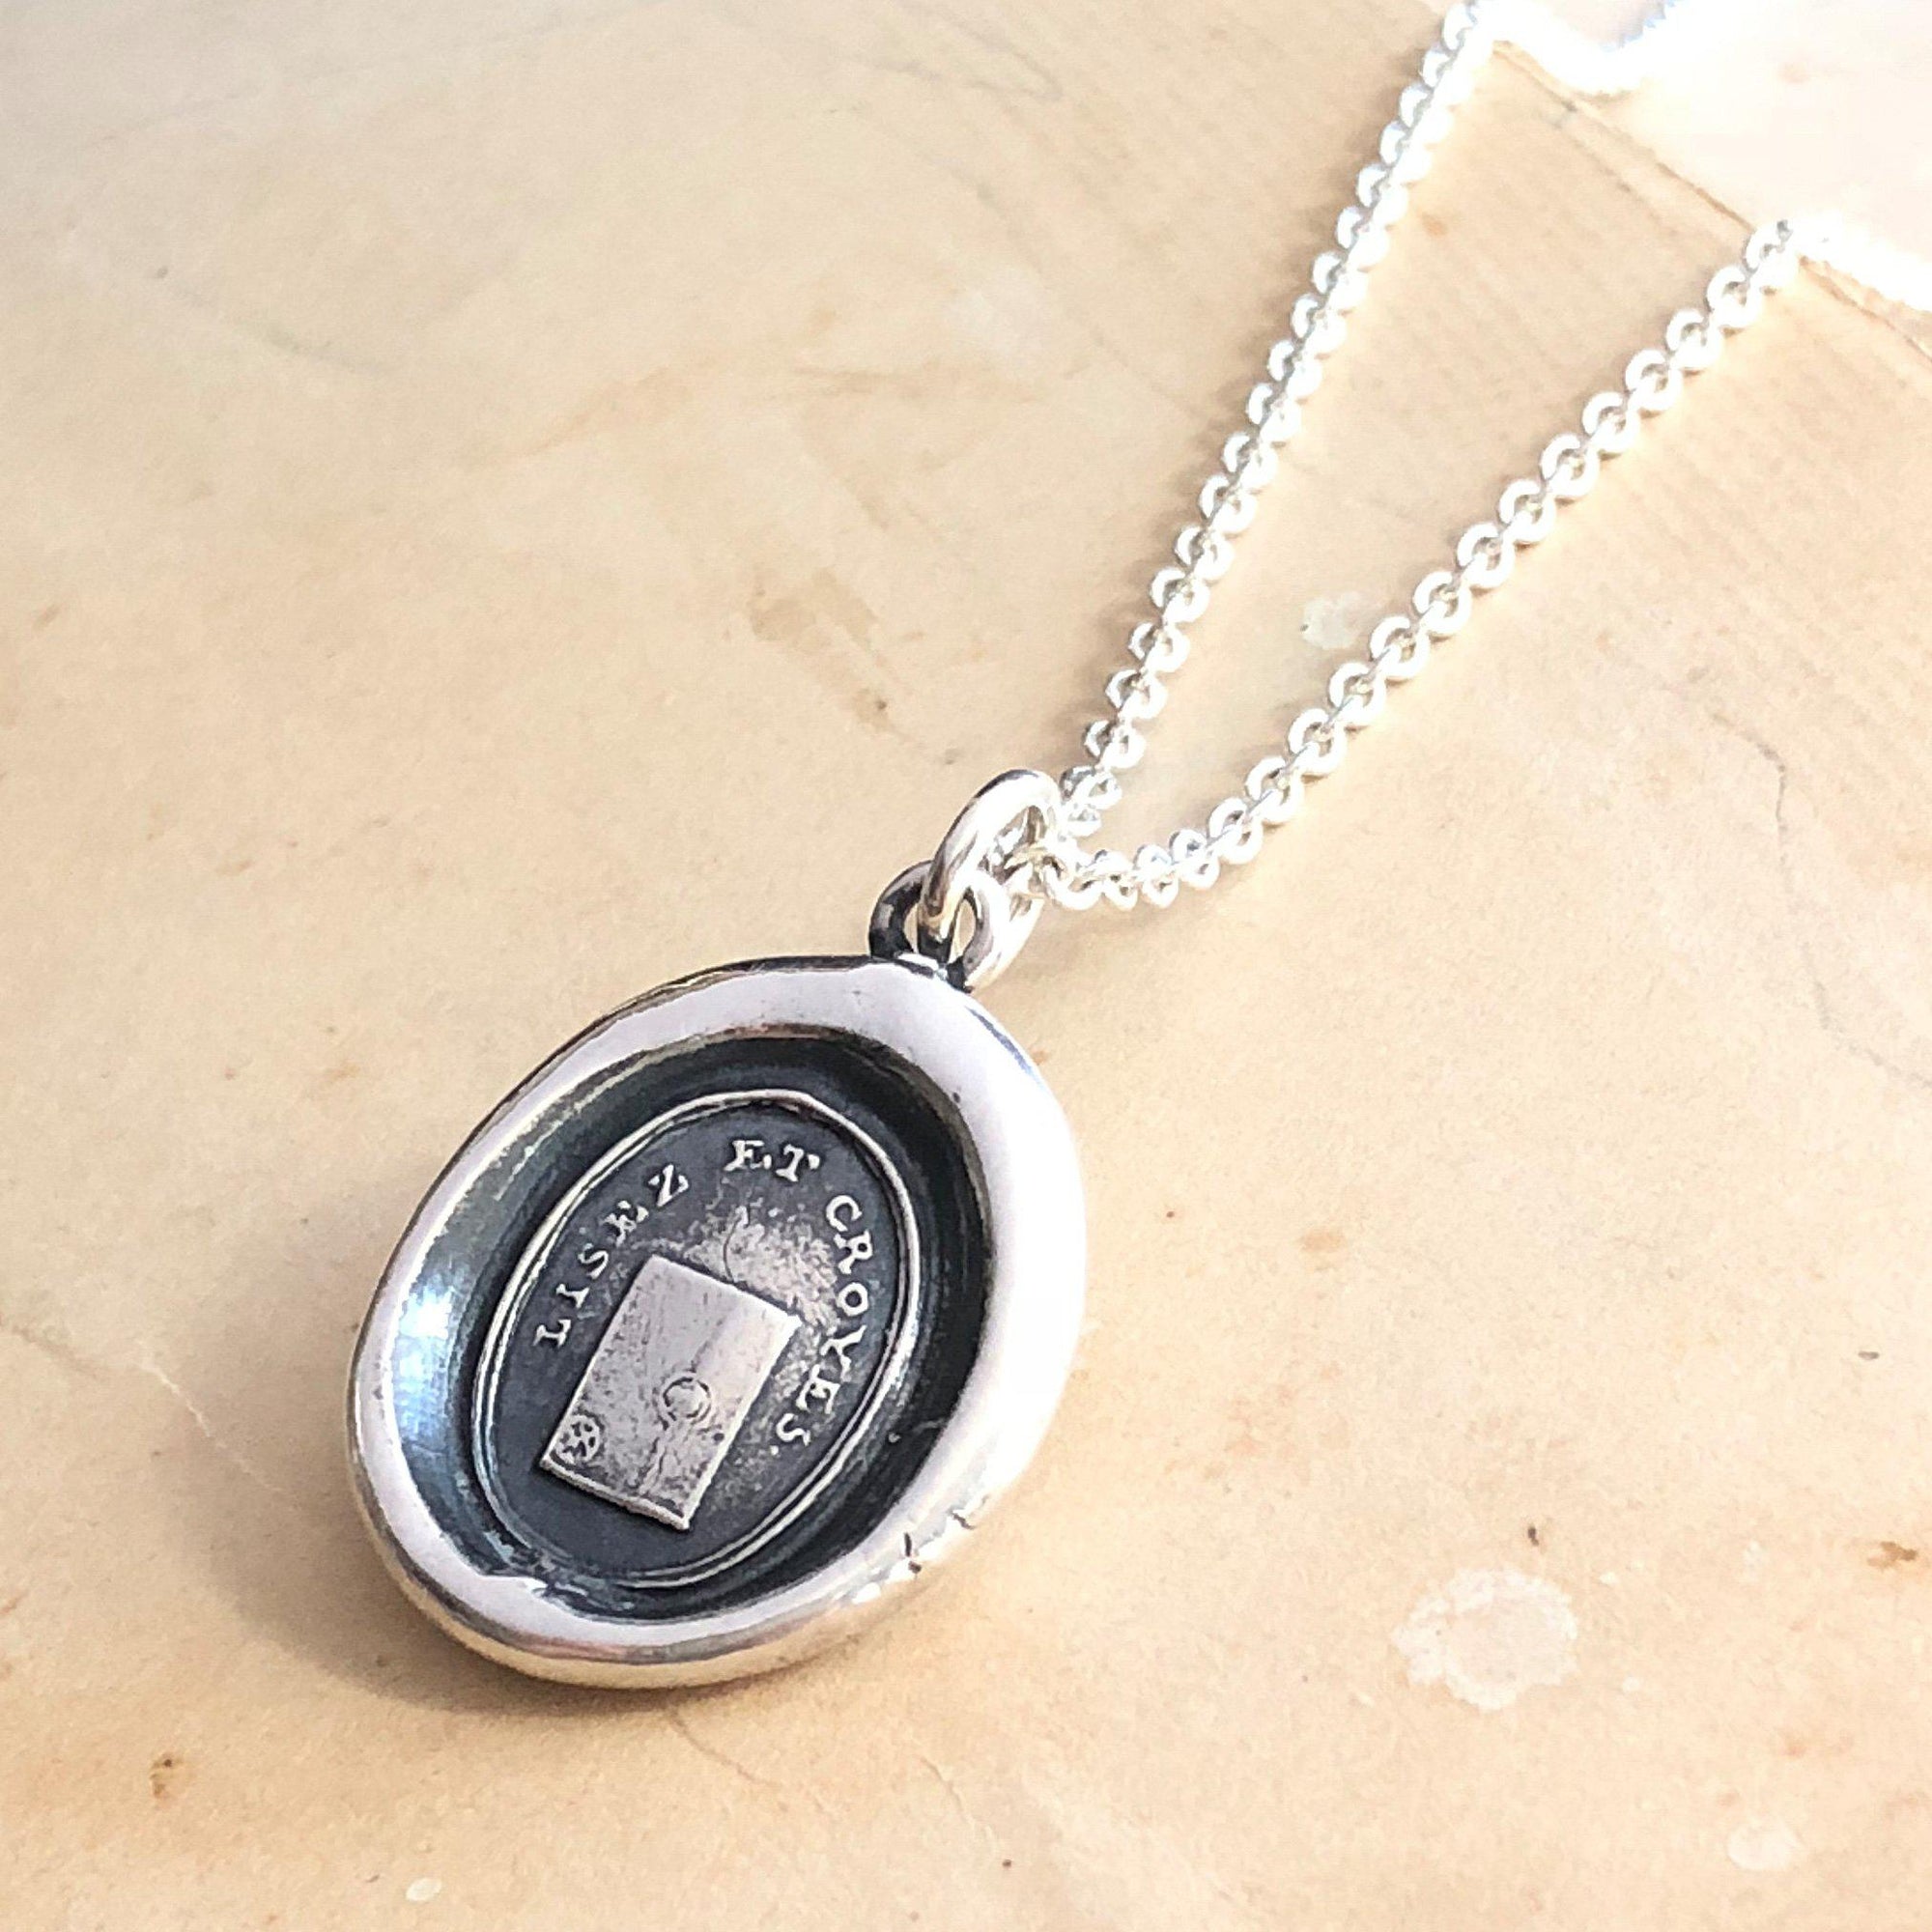 Truth and sincerity wax seal necklace